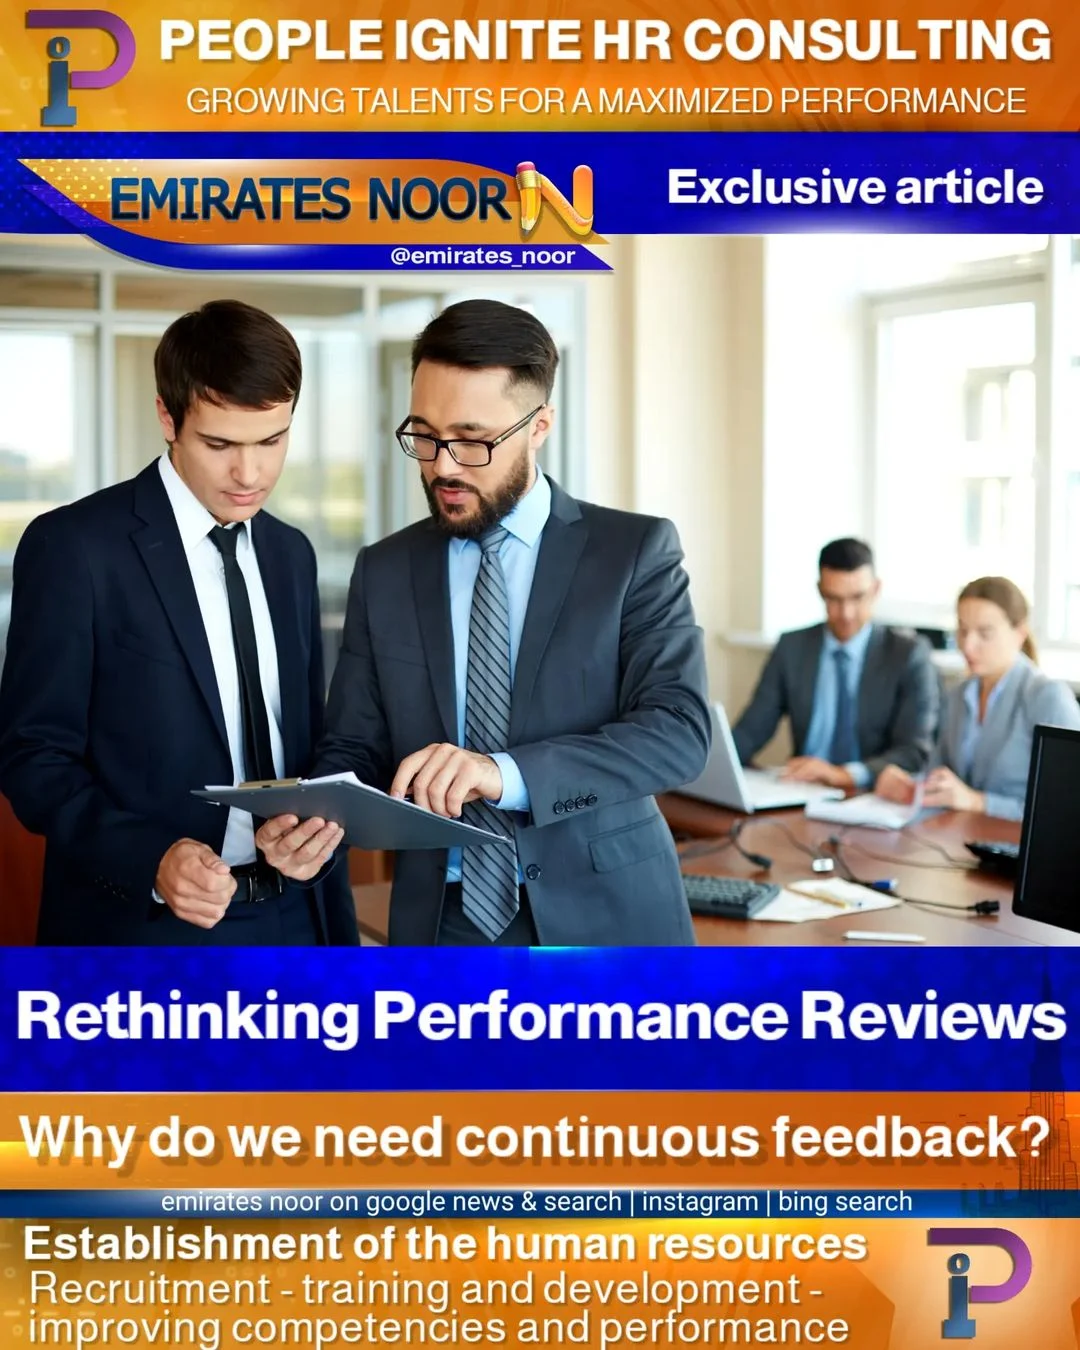 HR Consulting Why do we need continuous feedback